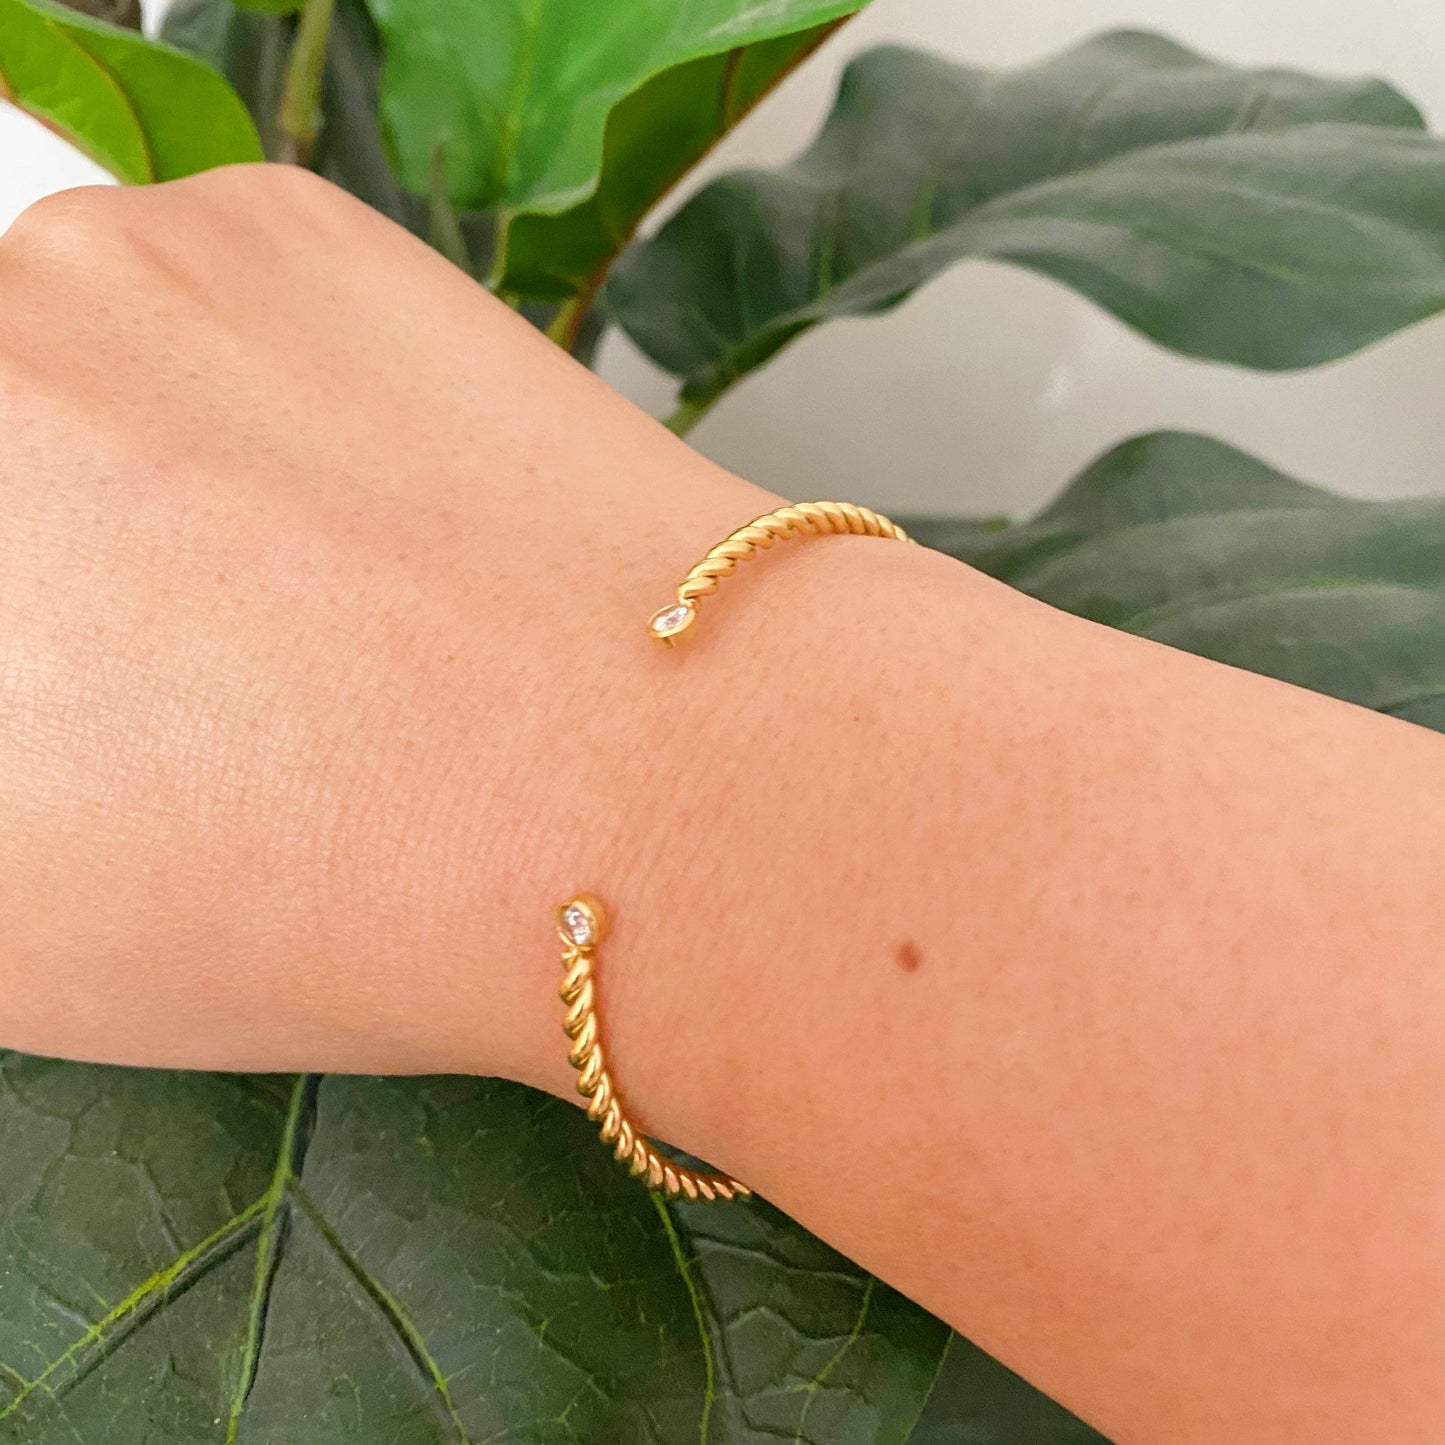 Slim And Cabled Open Bangle Bracelet: Gold